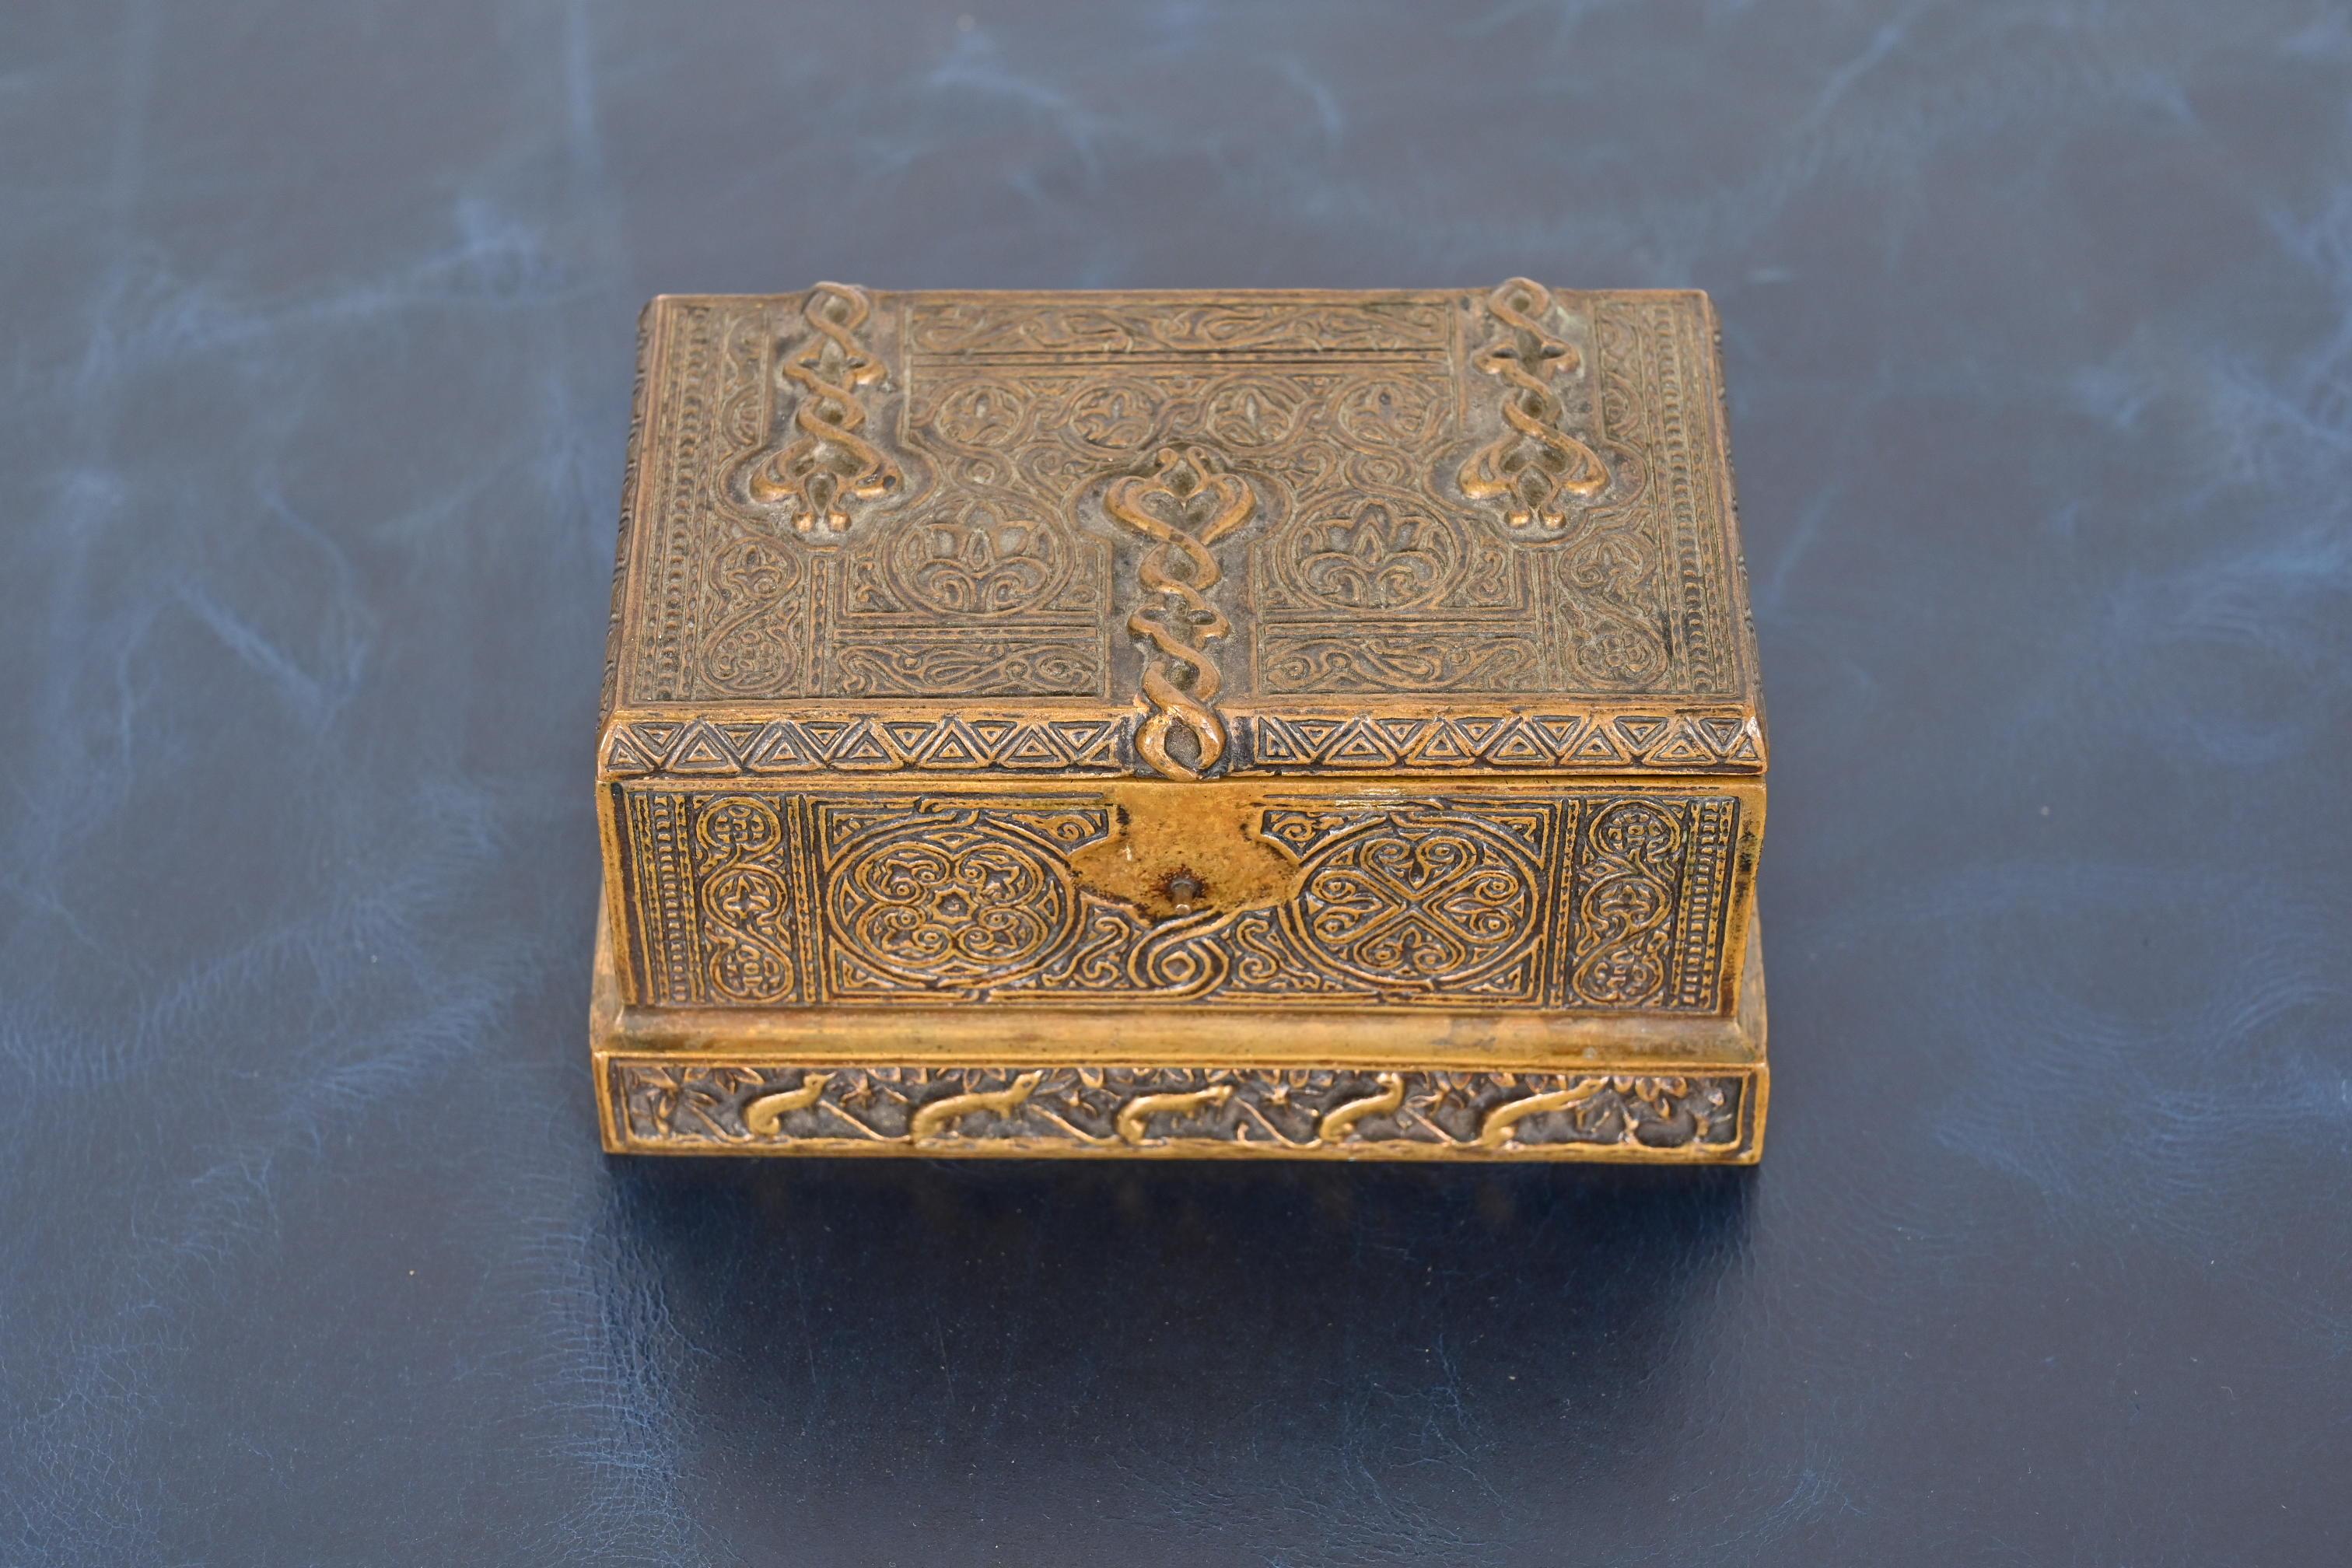 A gorgeous antique bronze double inkwell box in the Venetian design

By Tiffany Studios (signed to the underside)

New York, USA, Early 20th Century

Measures: 5.25